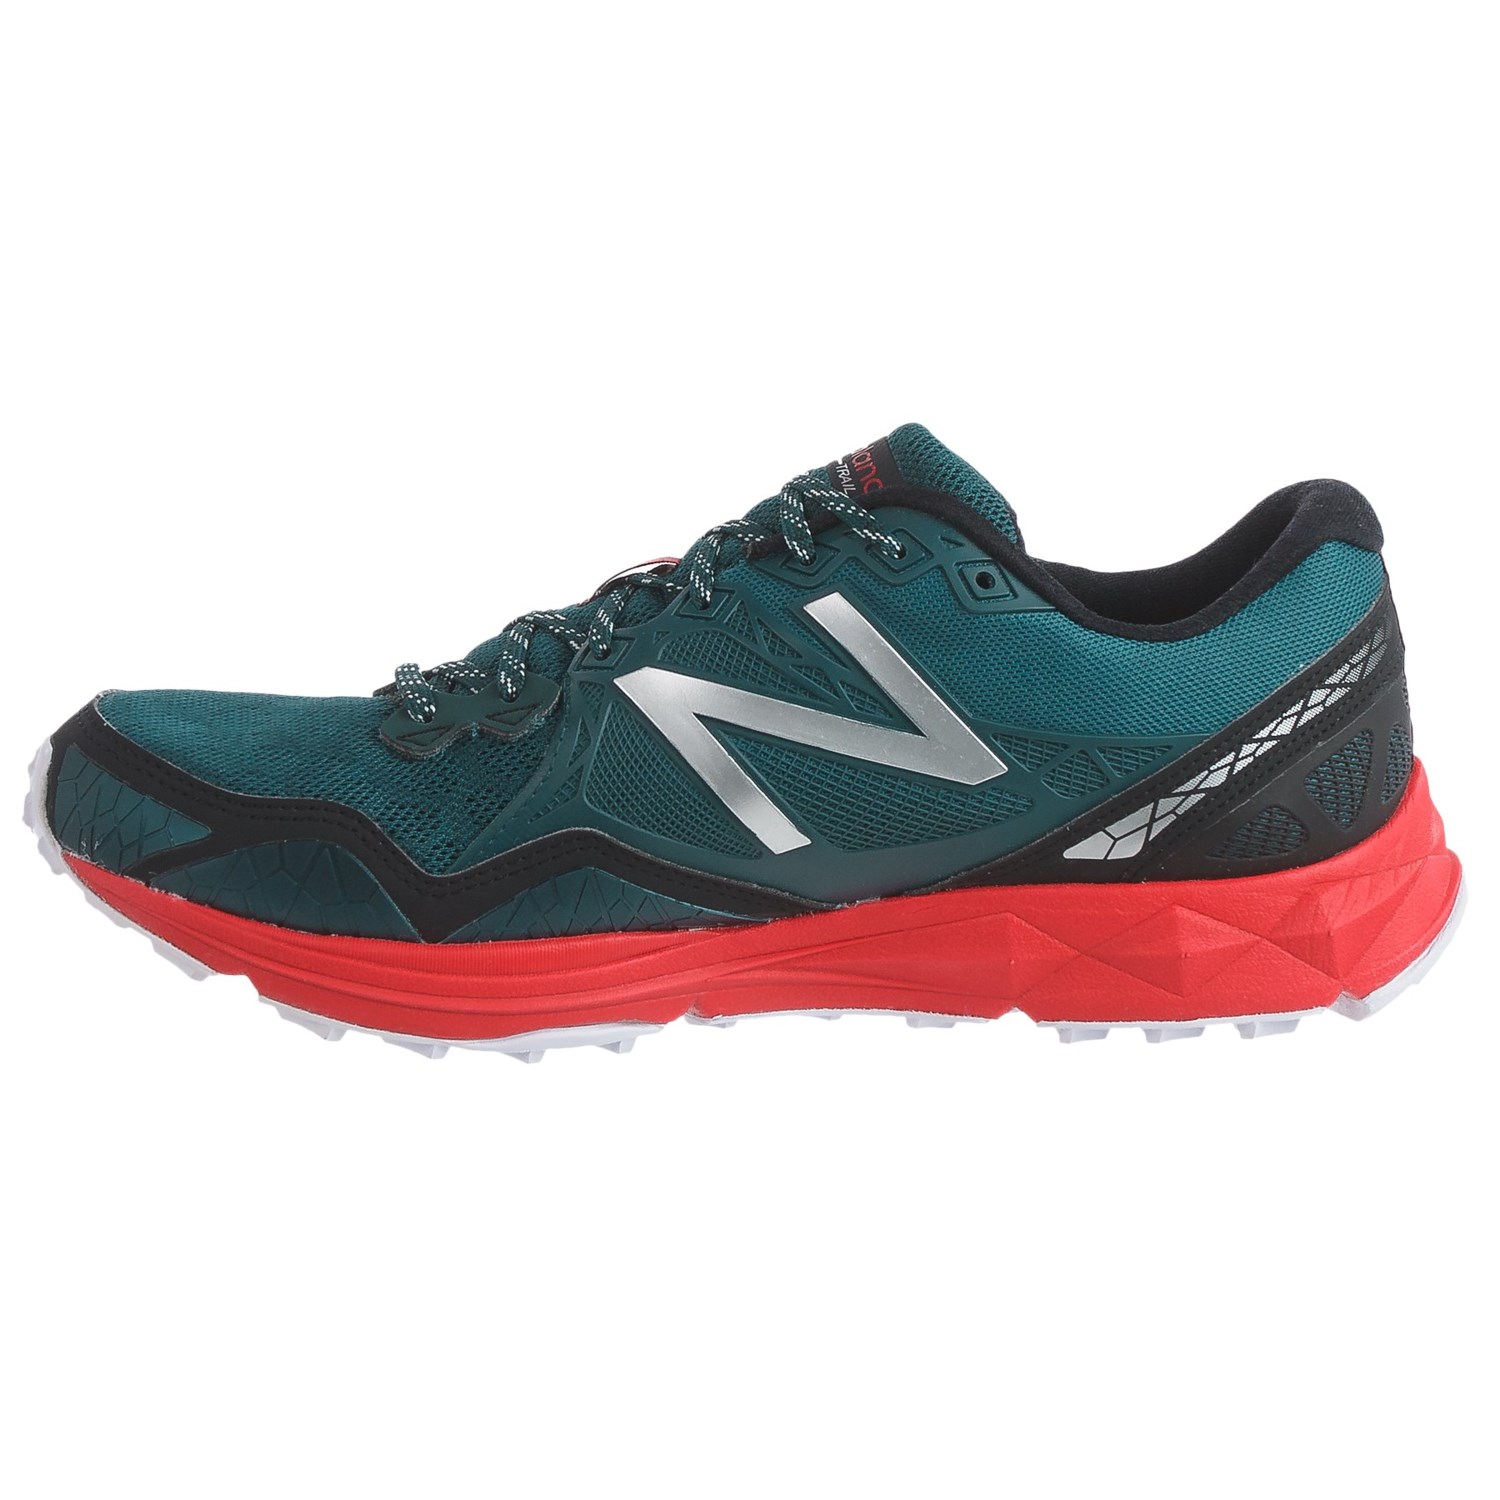 New Balance MT910V3 Gore-Tex® Trail Running Shoes (For Men) - Save 55%